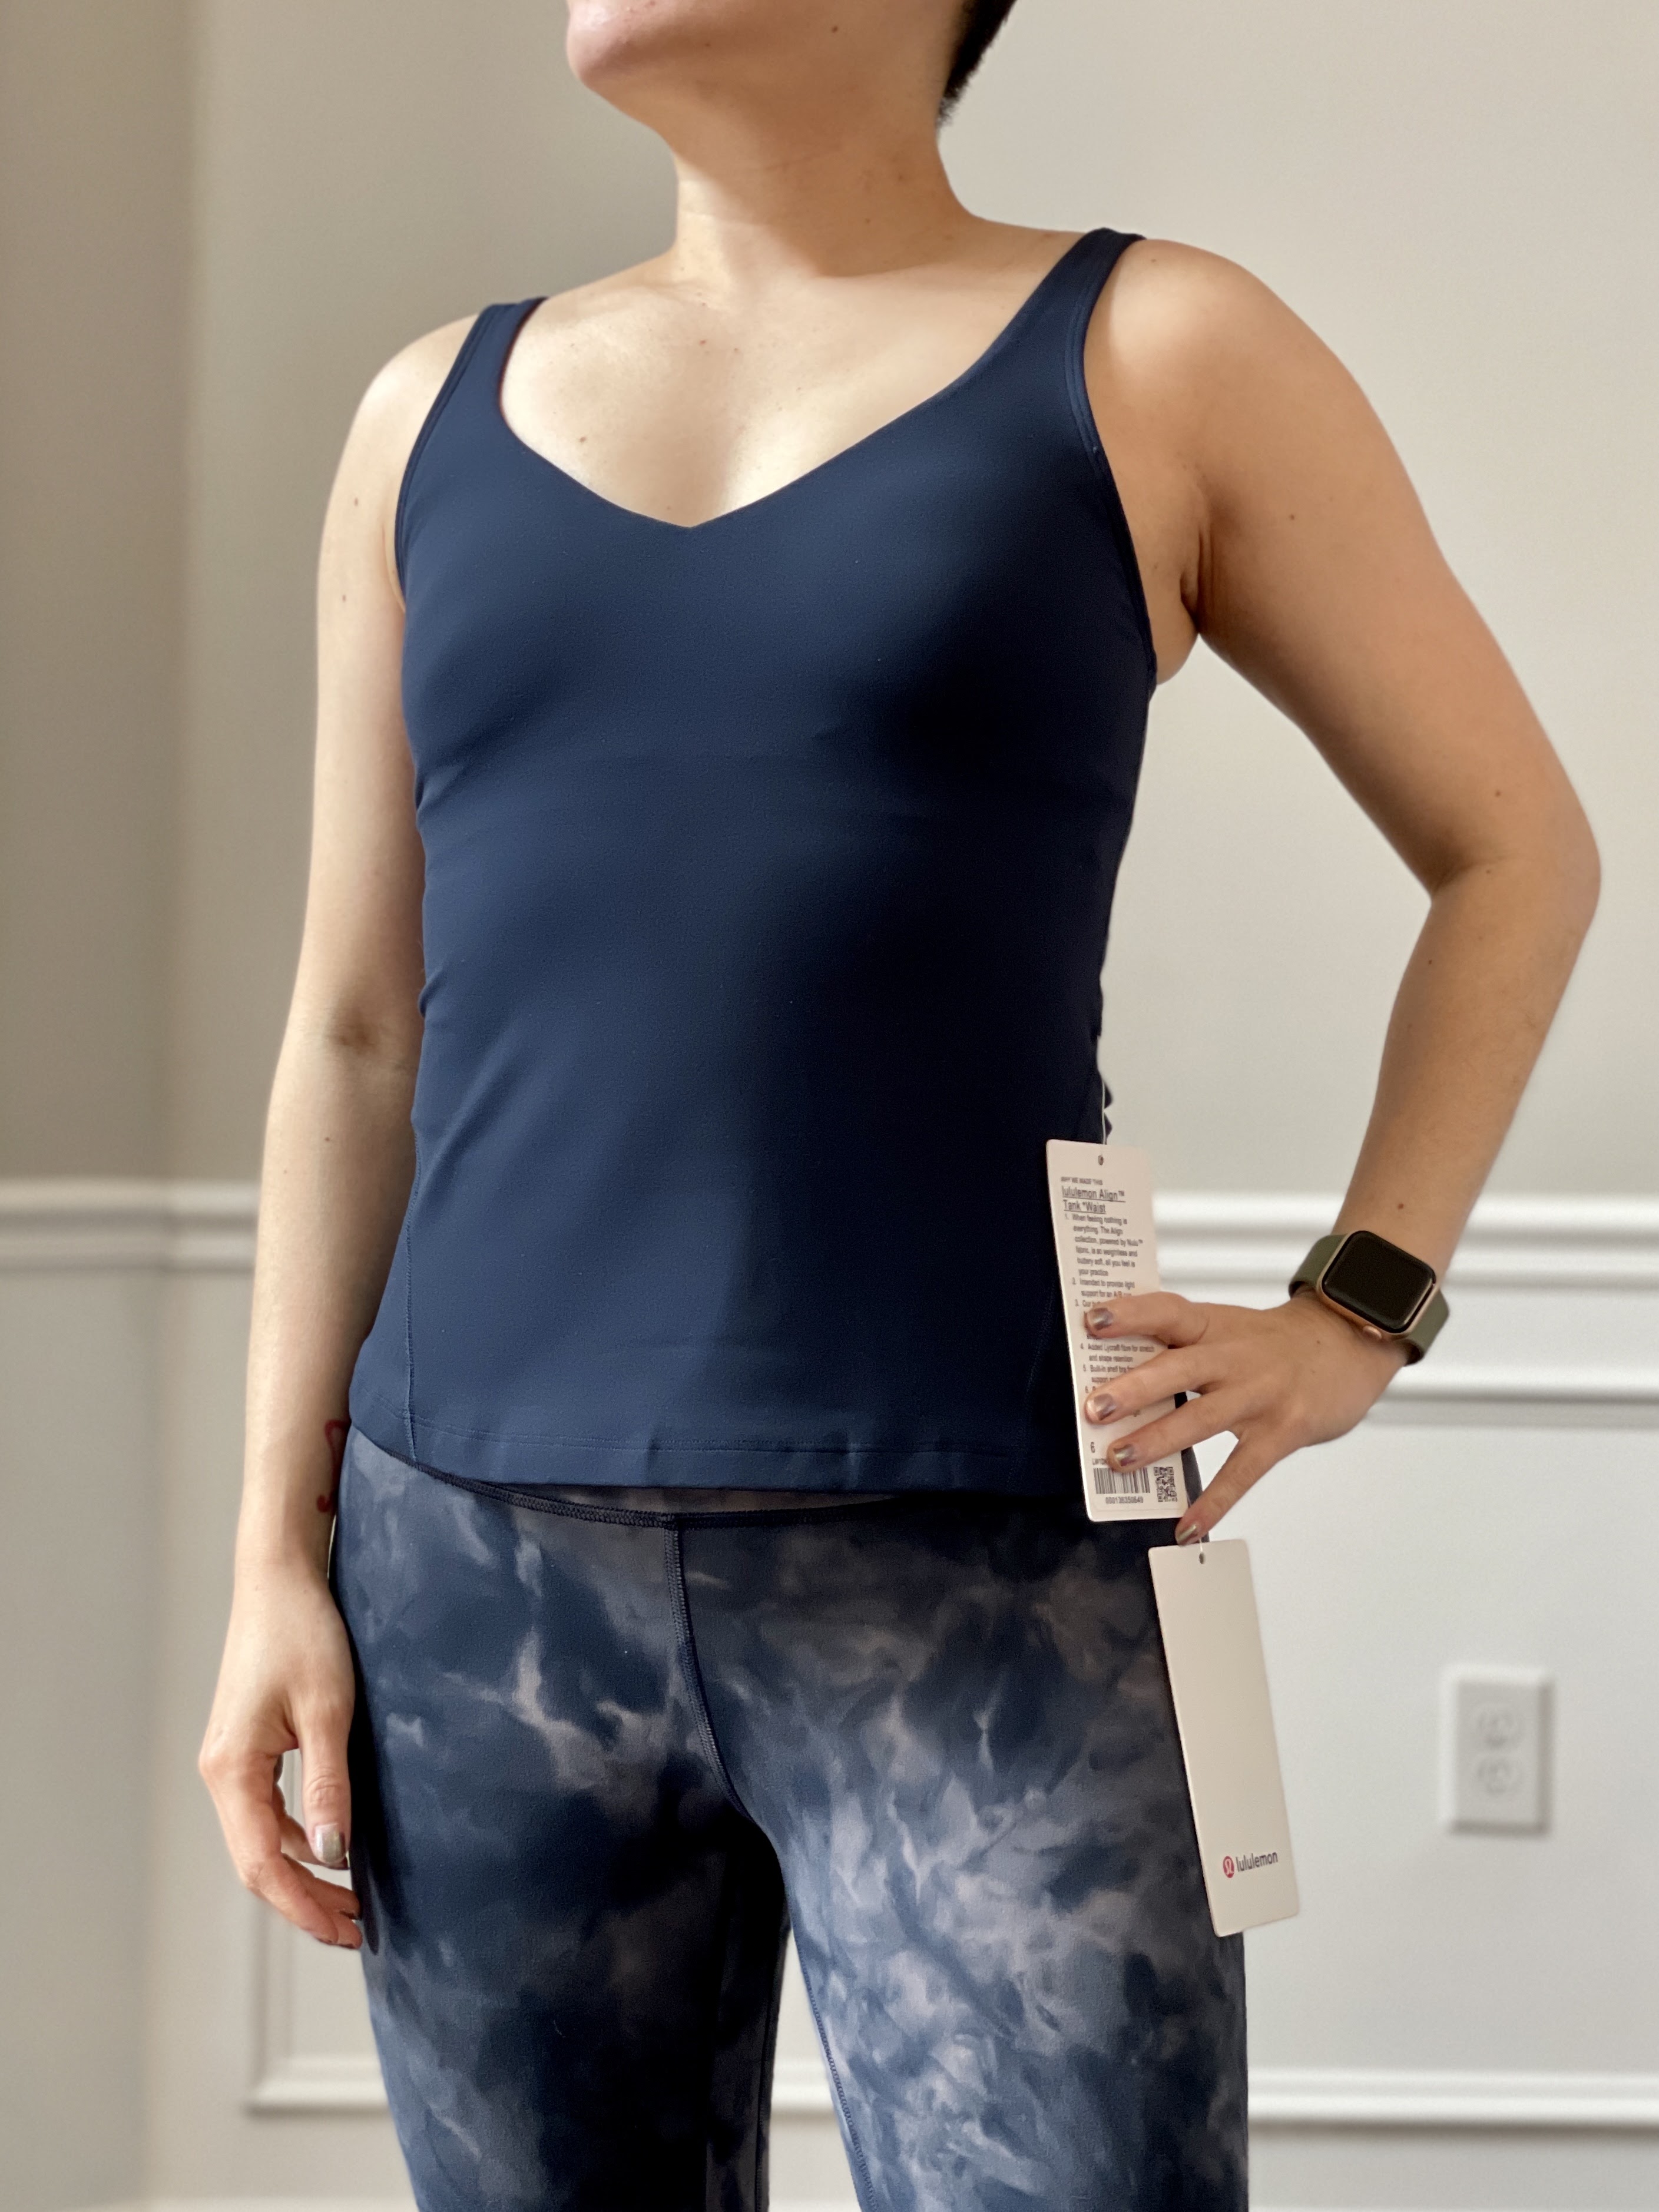 Lululemon Align Tank size 8 Soft cranberry was never released in the US